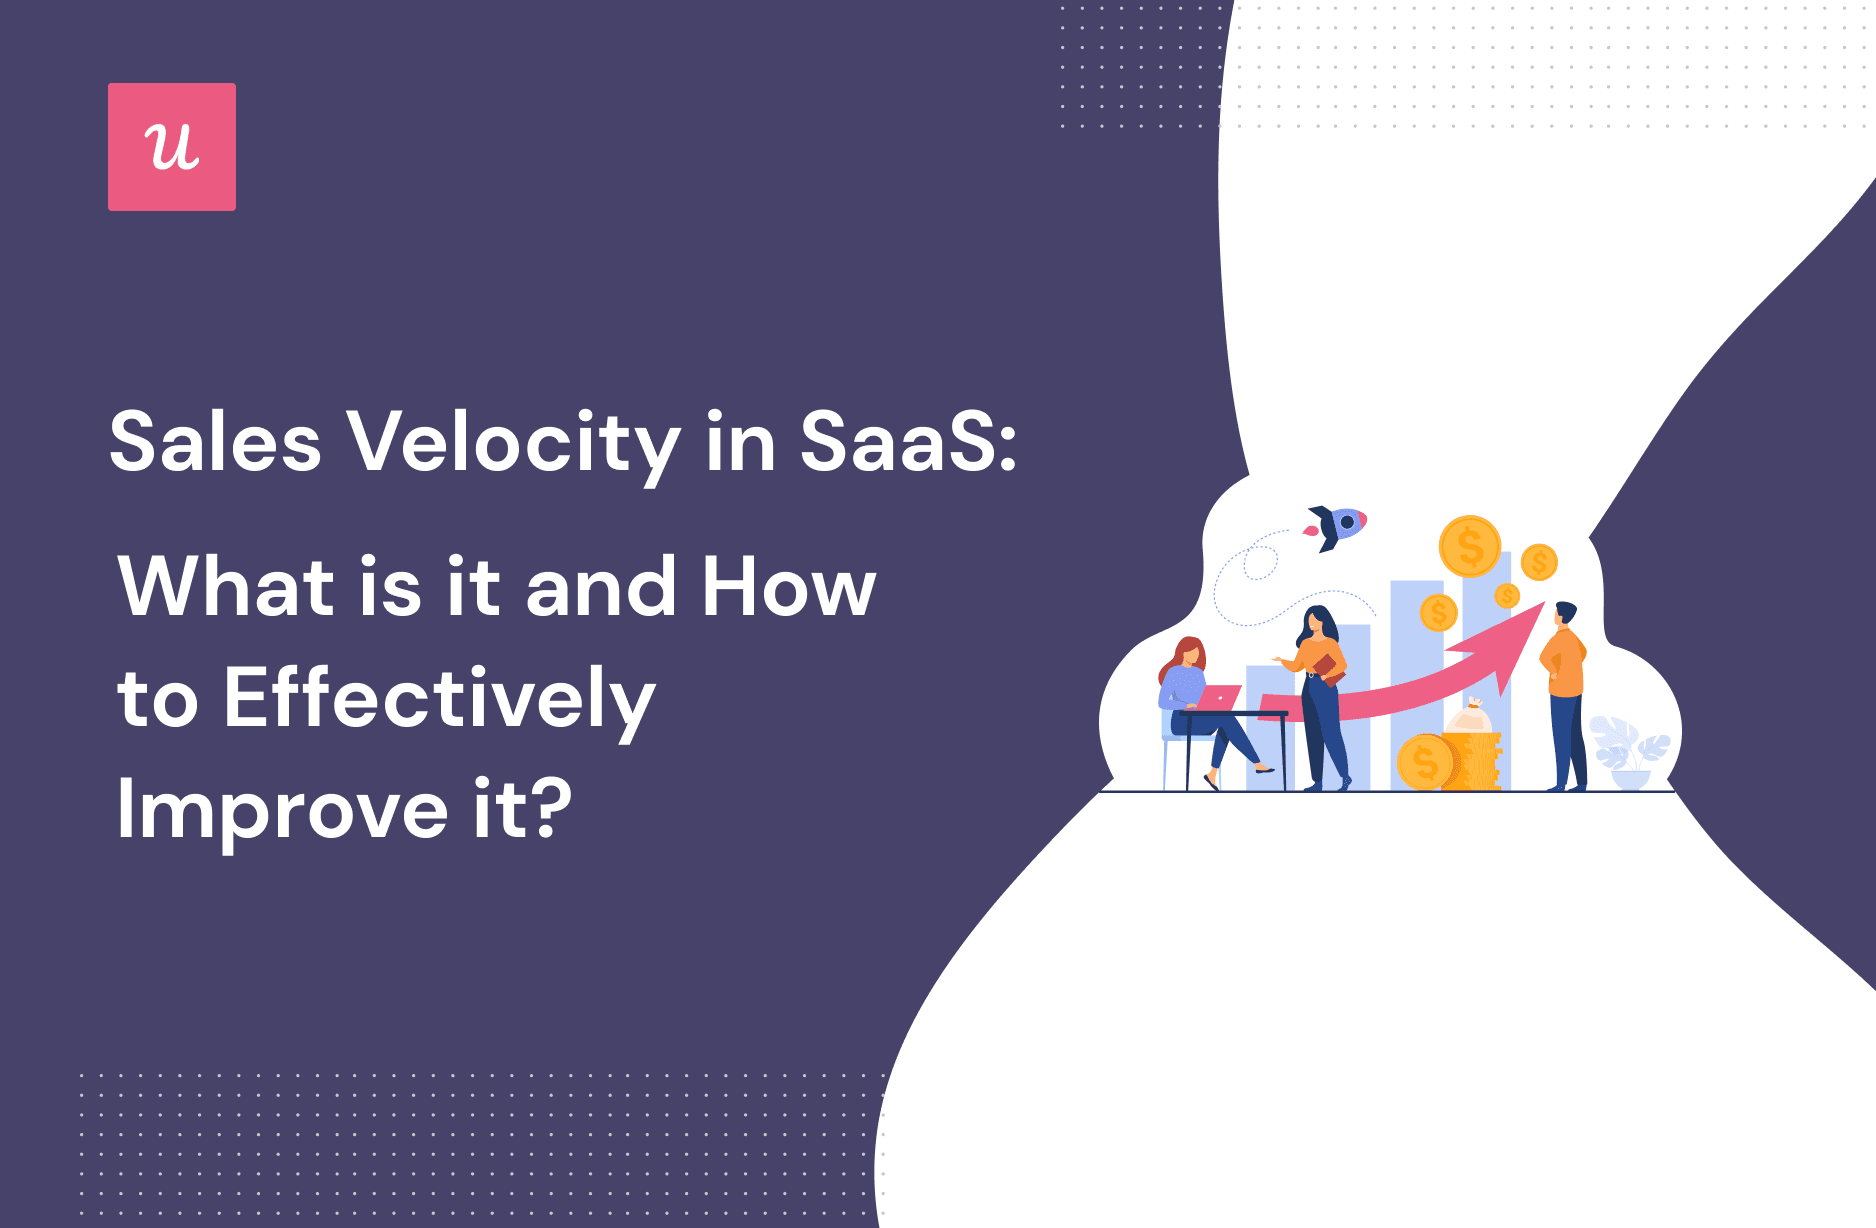 High Velocity Sales: What it is, why it matters & how to do it right